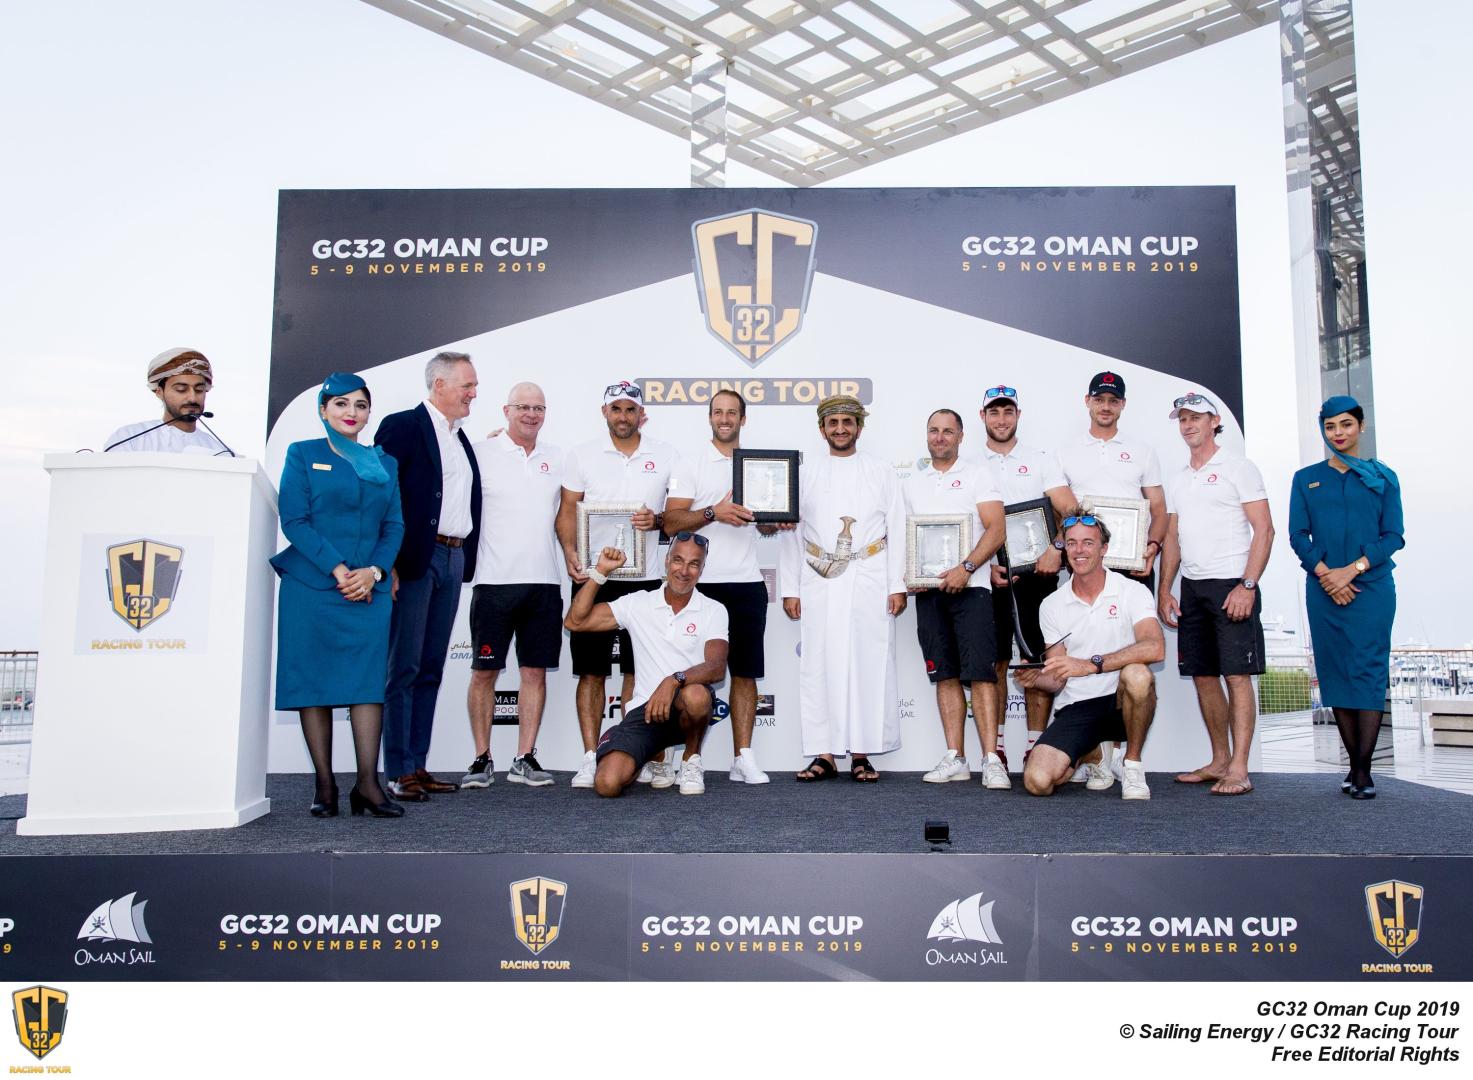 Clean sweep for Alinghi as she claims 2019 GC32 Oman Cup